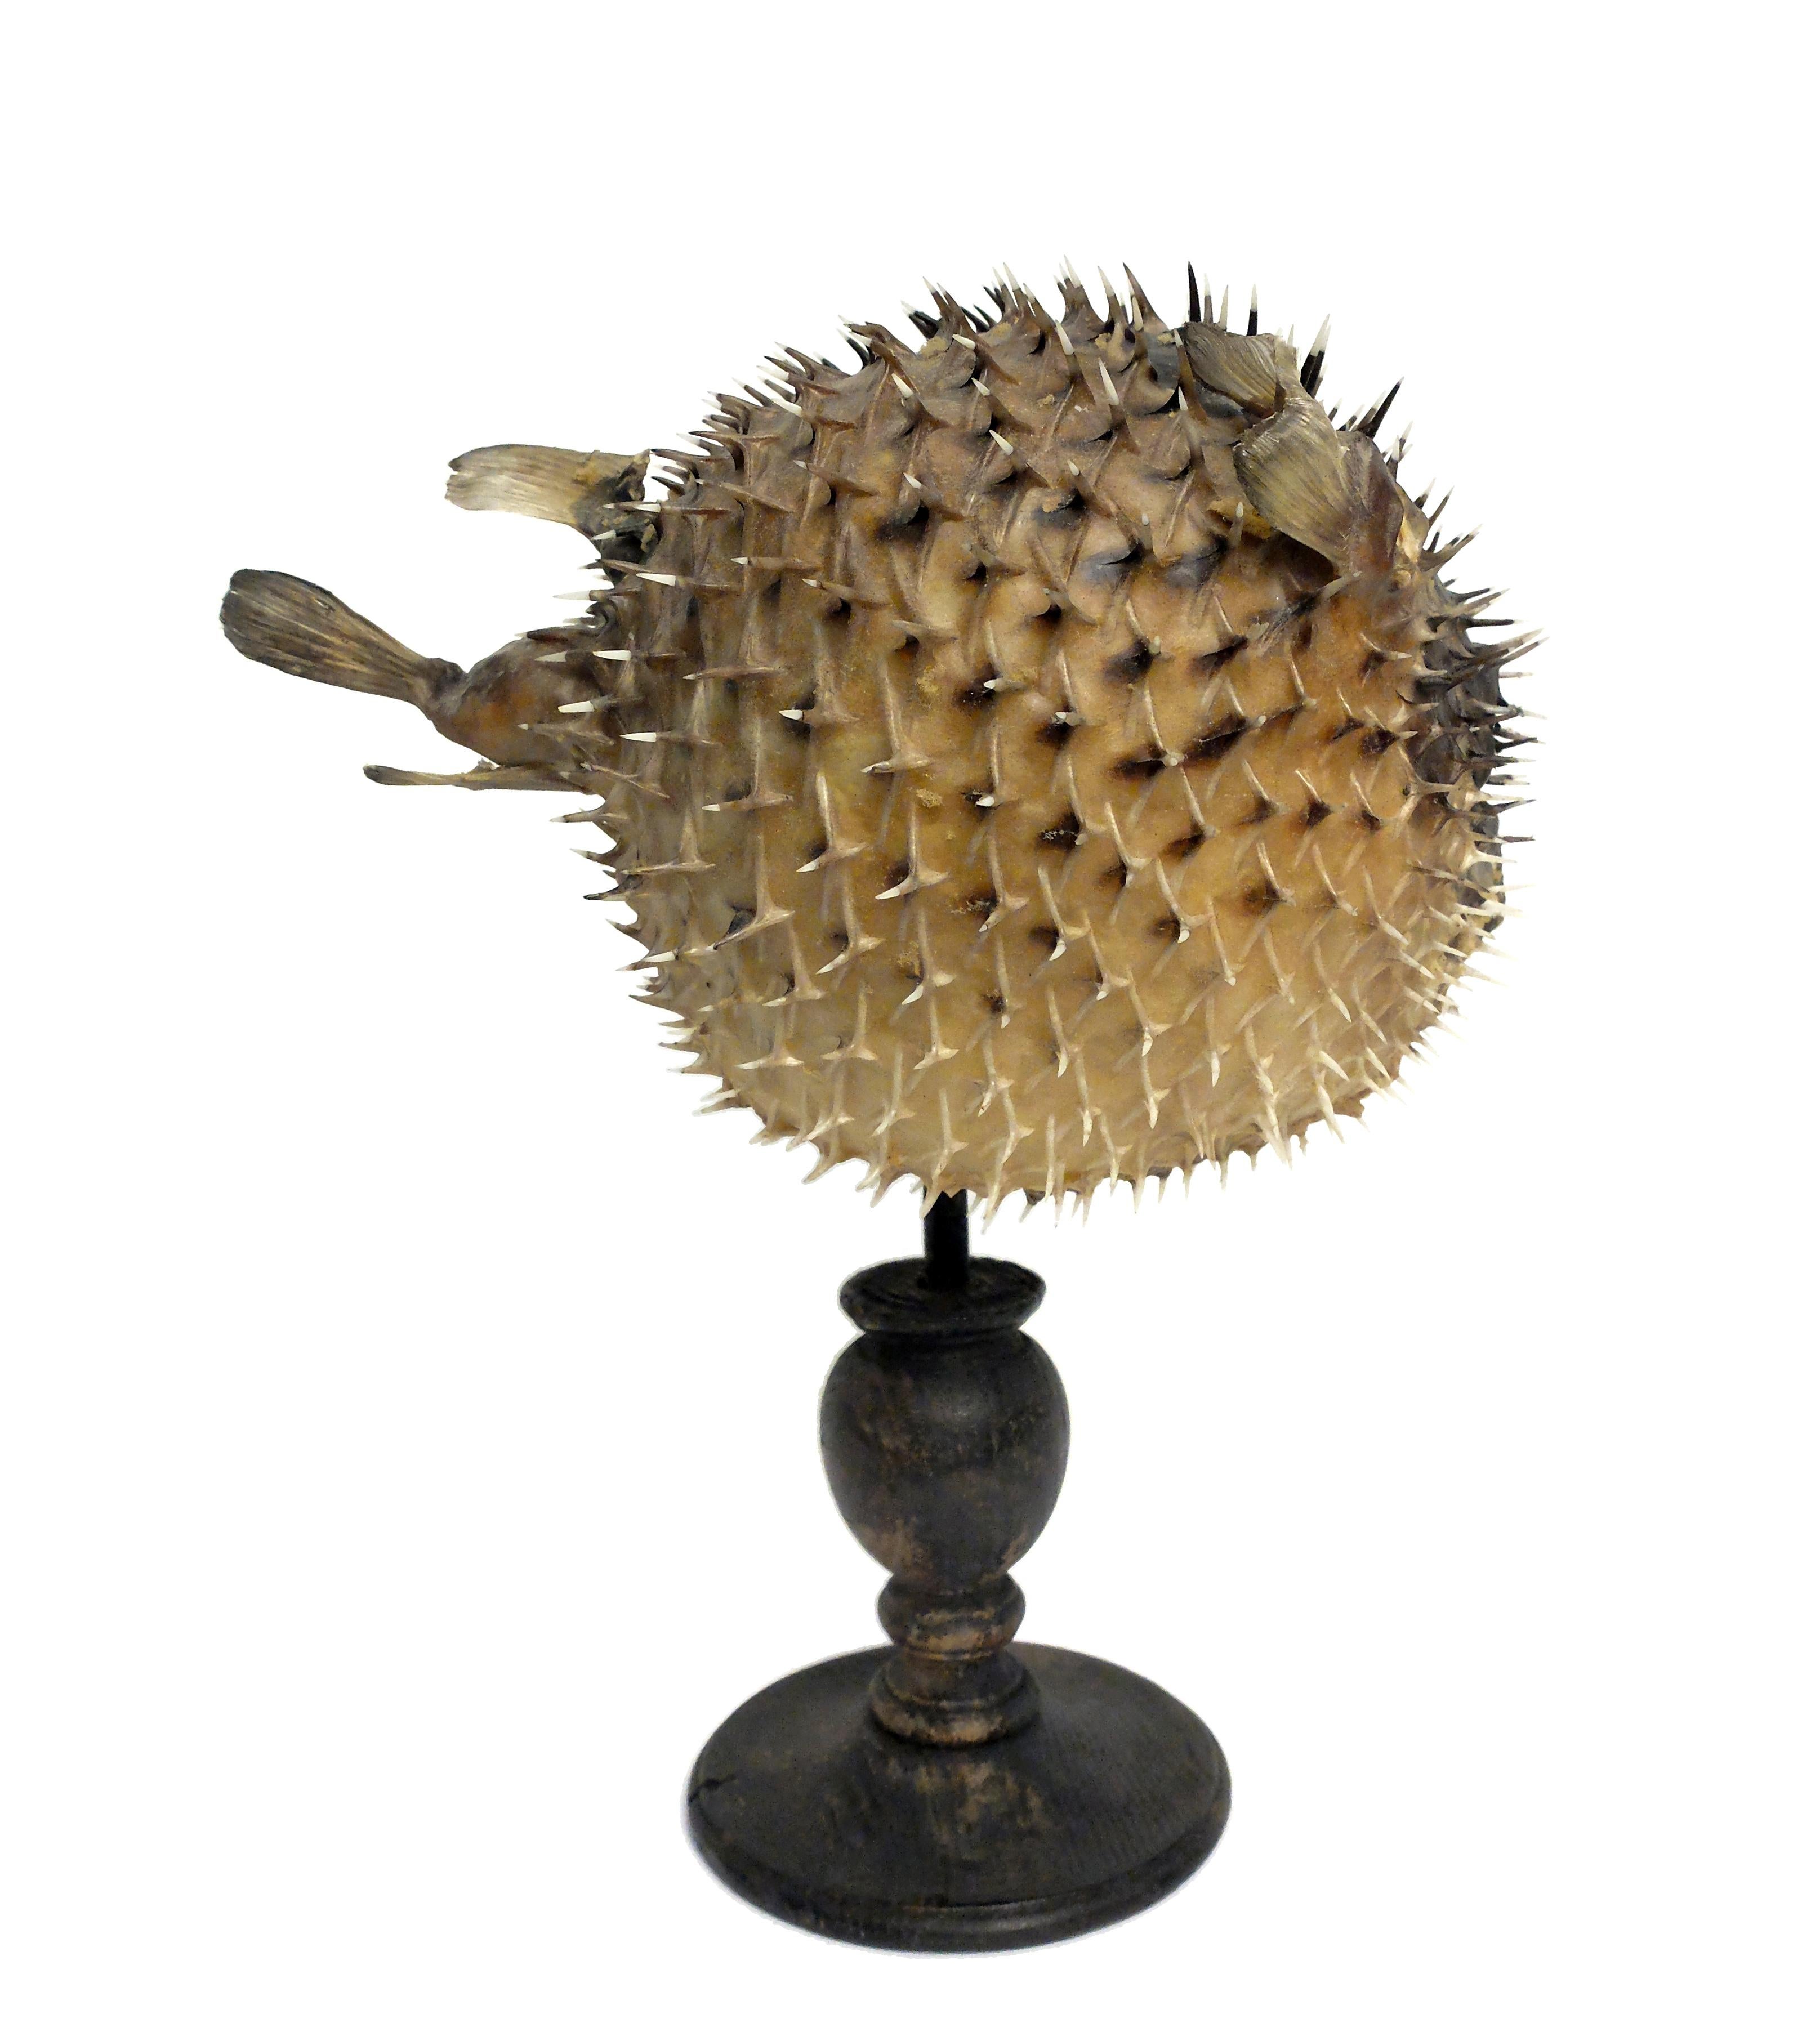 Mid-19th Century 19th Century Wunderkammer Marine Natural Taxodermie Specimen of a Porcupine Fish